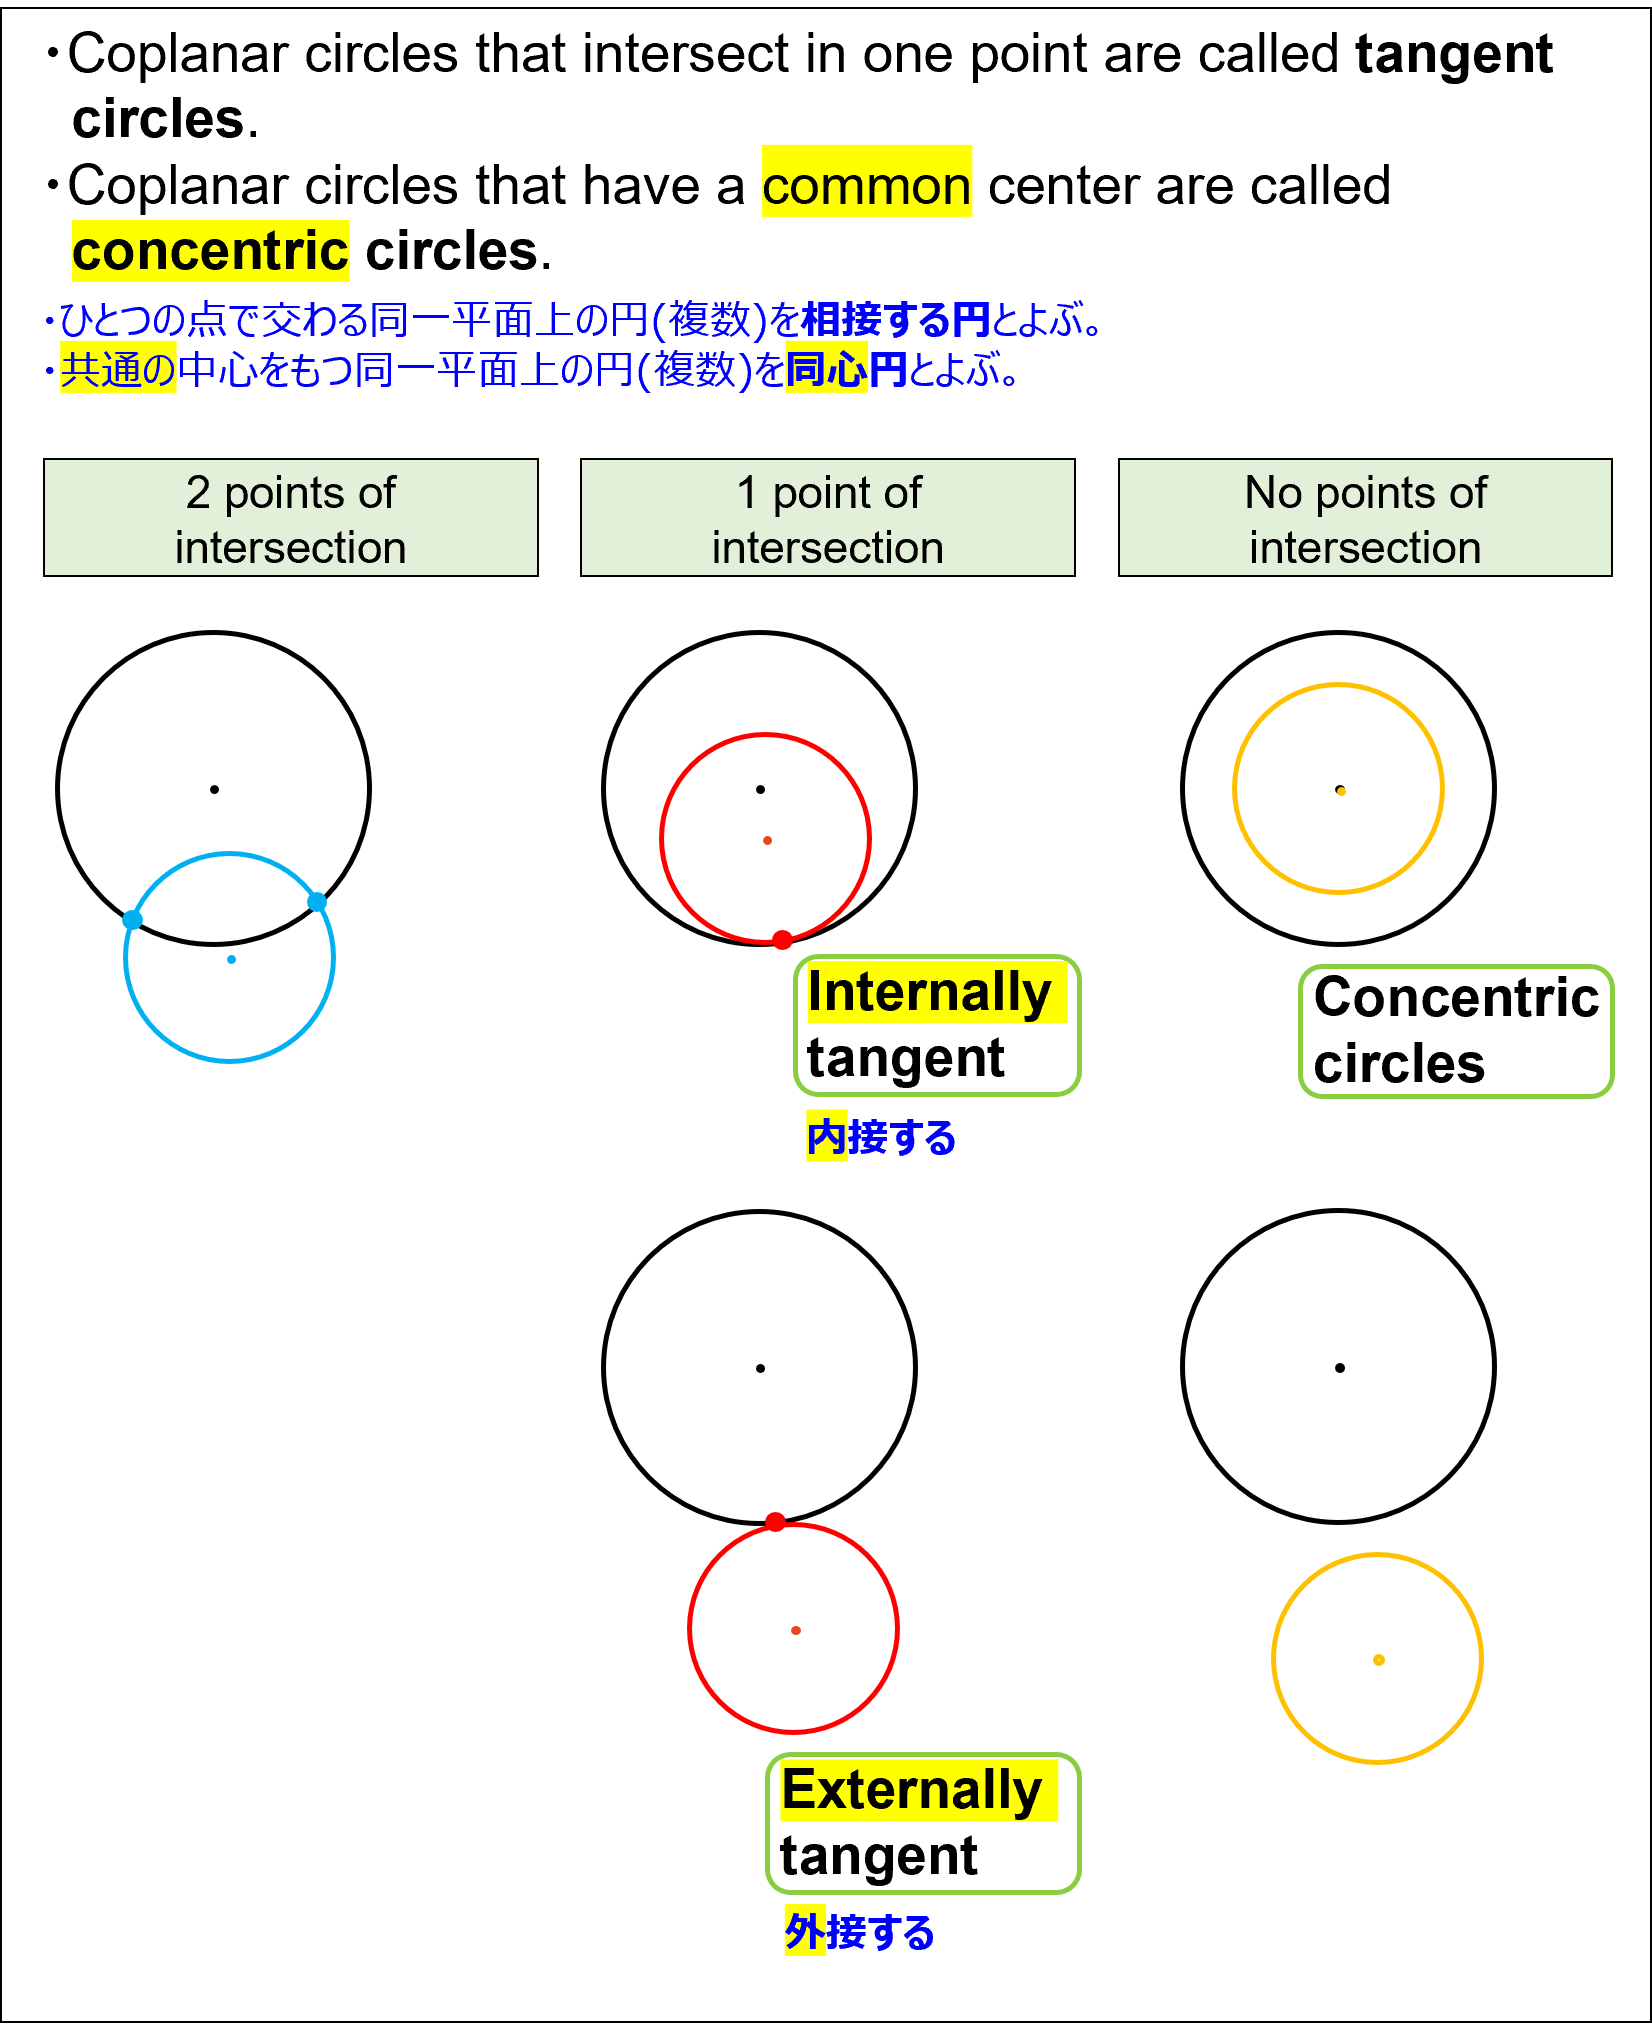 Definition of concentric circles and tangent